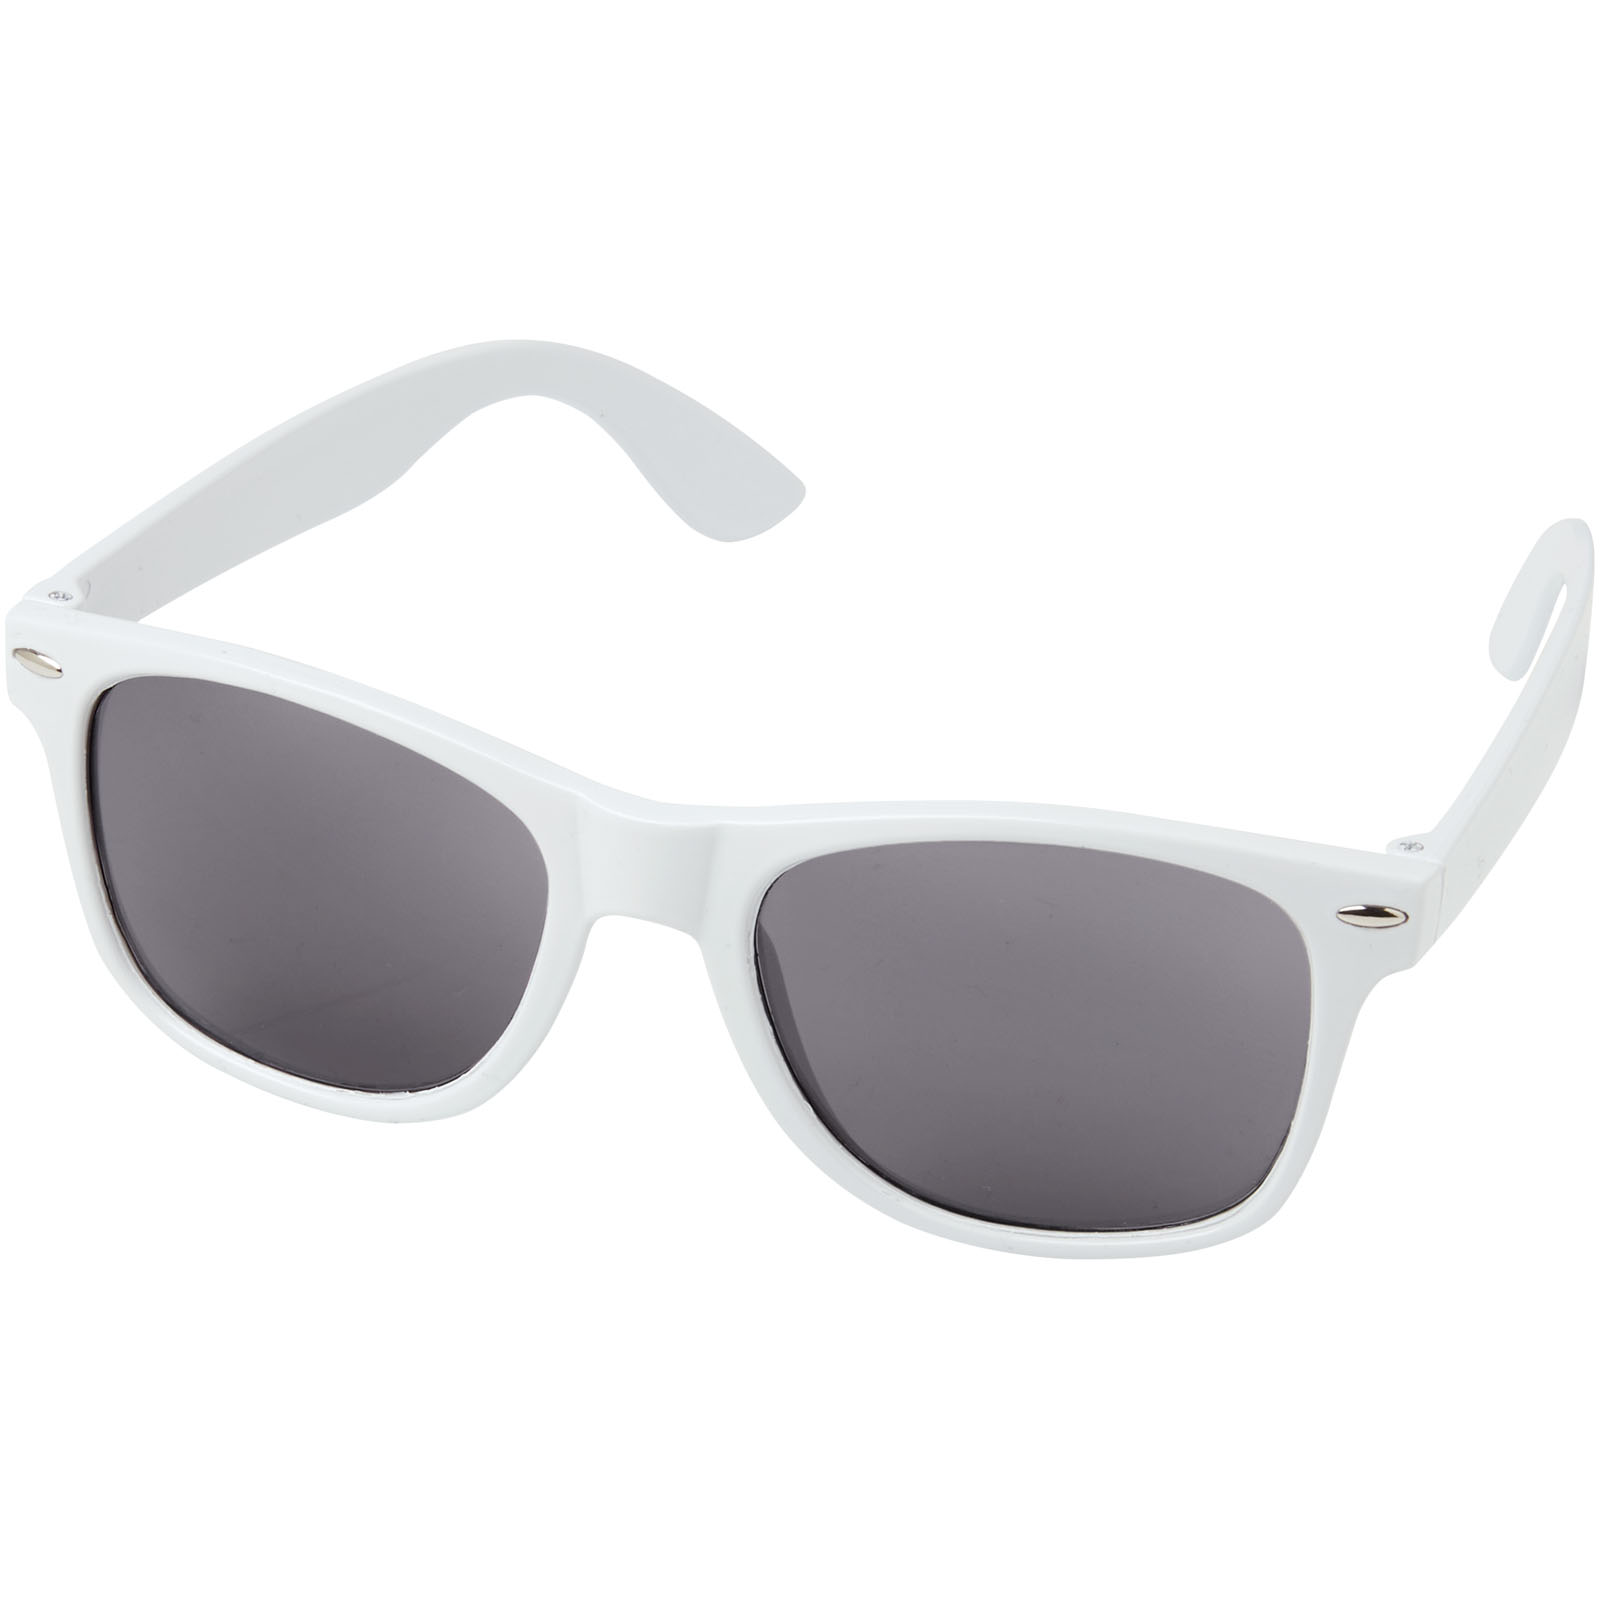 Sports & Leisure - Sun Ray recycled plastic sunglasses